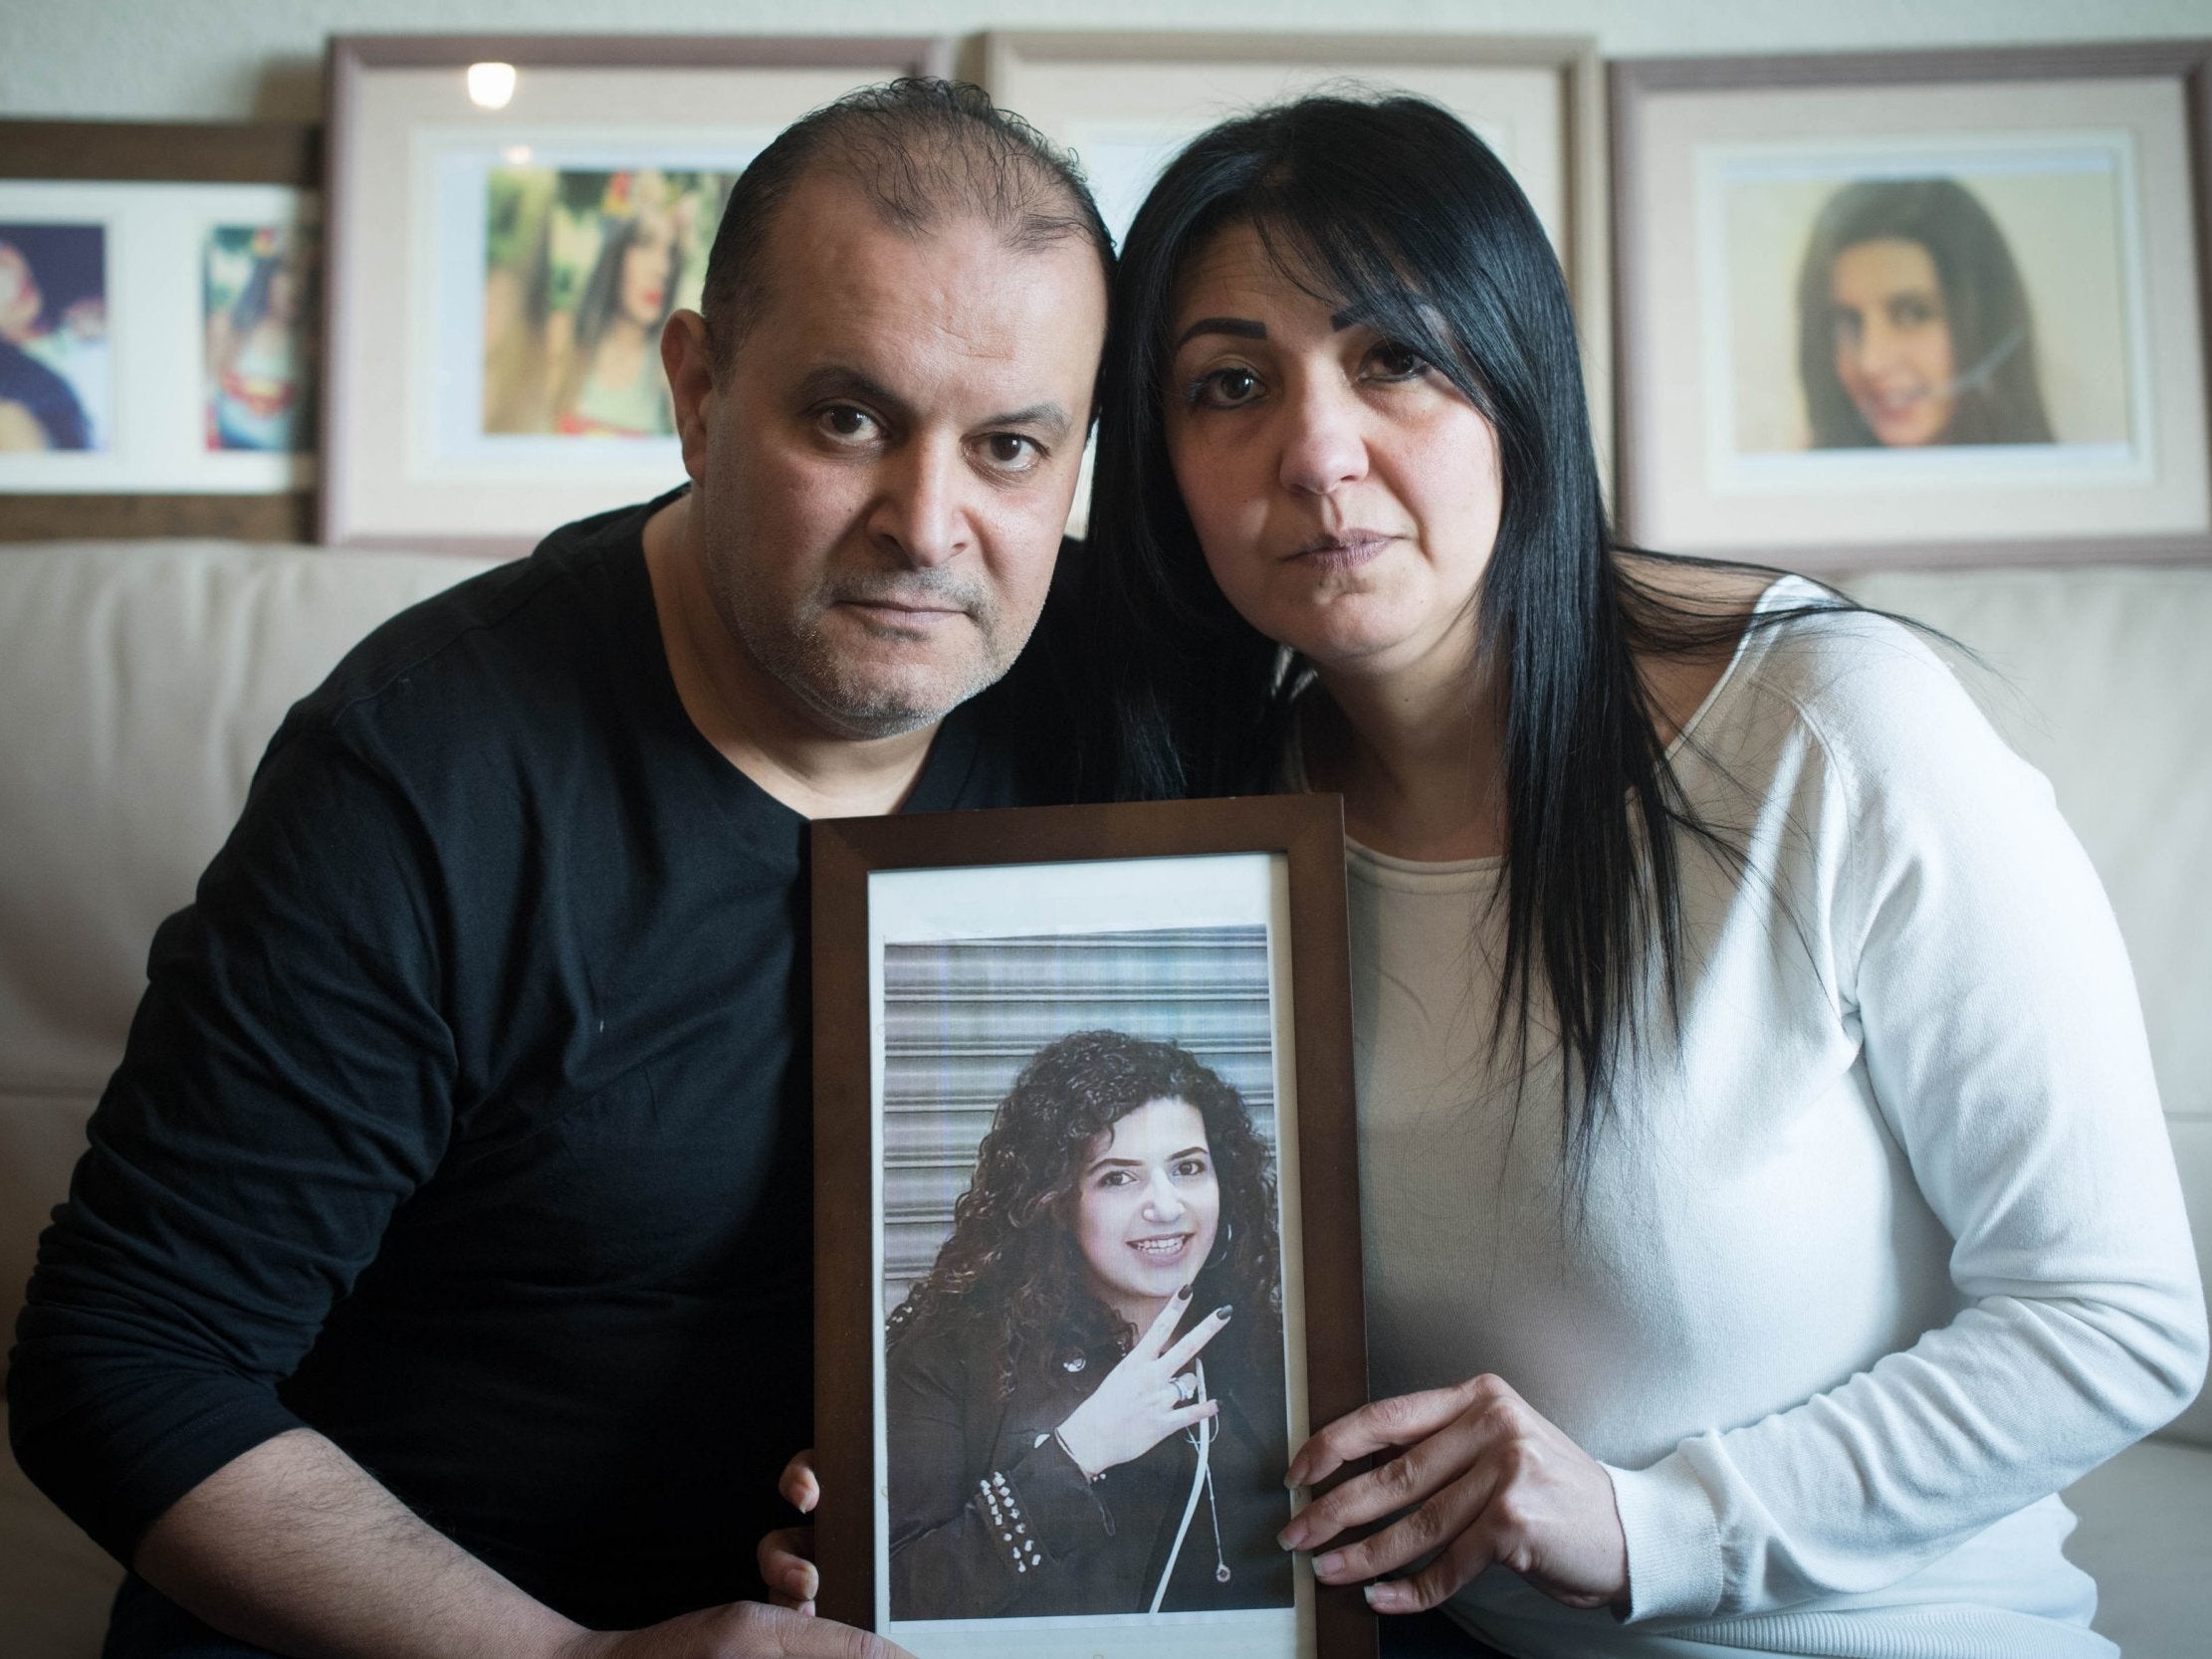 Mohamed Moustafa and Nessrin Abu-Elenein, parents of Mariam Moustafa at their home in Nottingham.